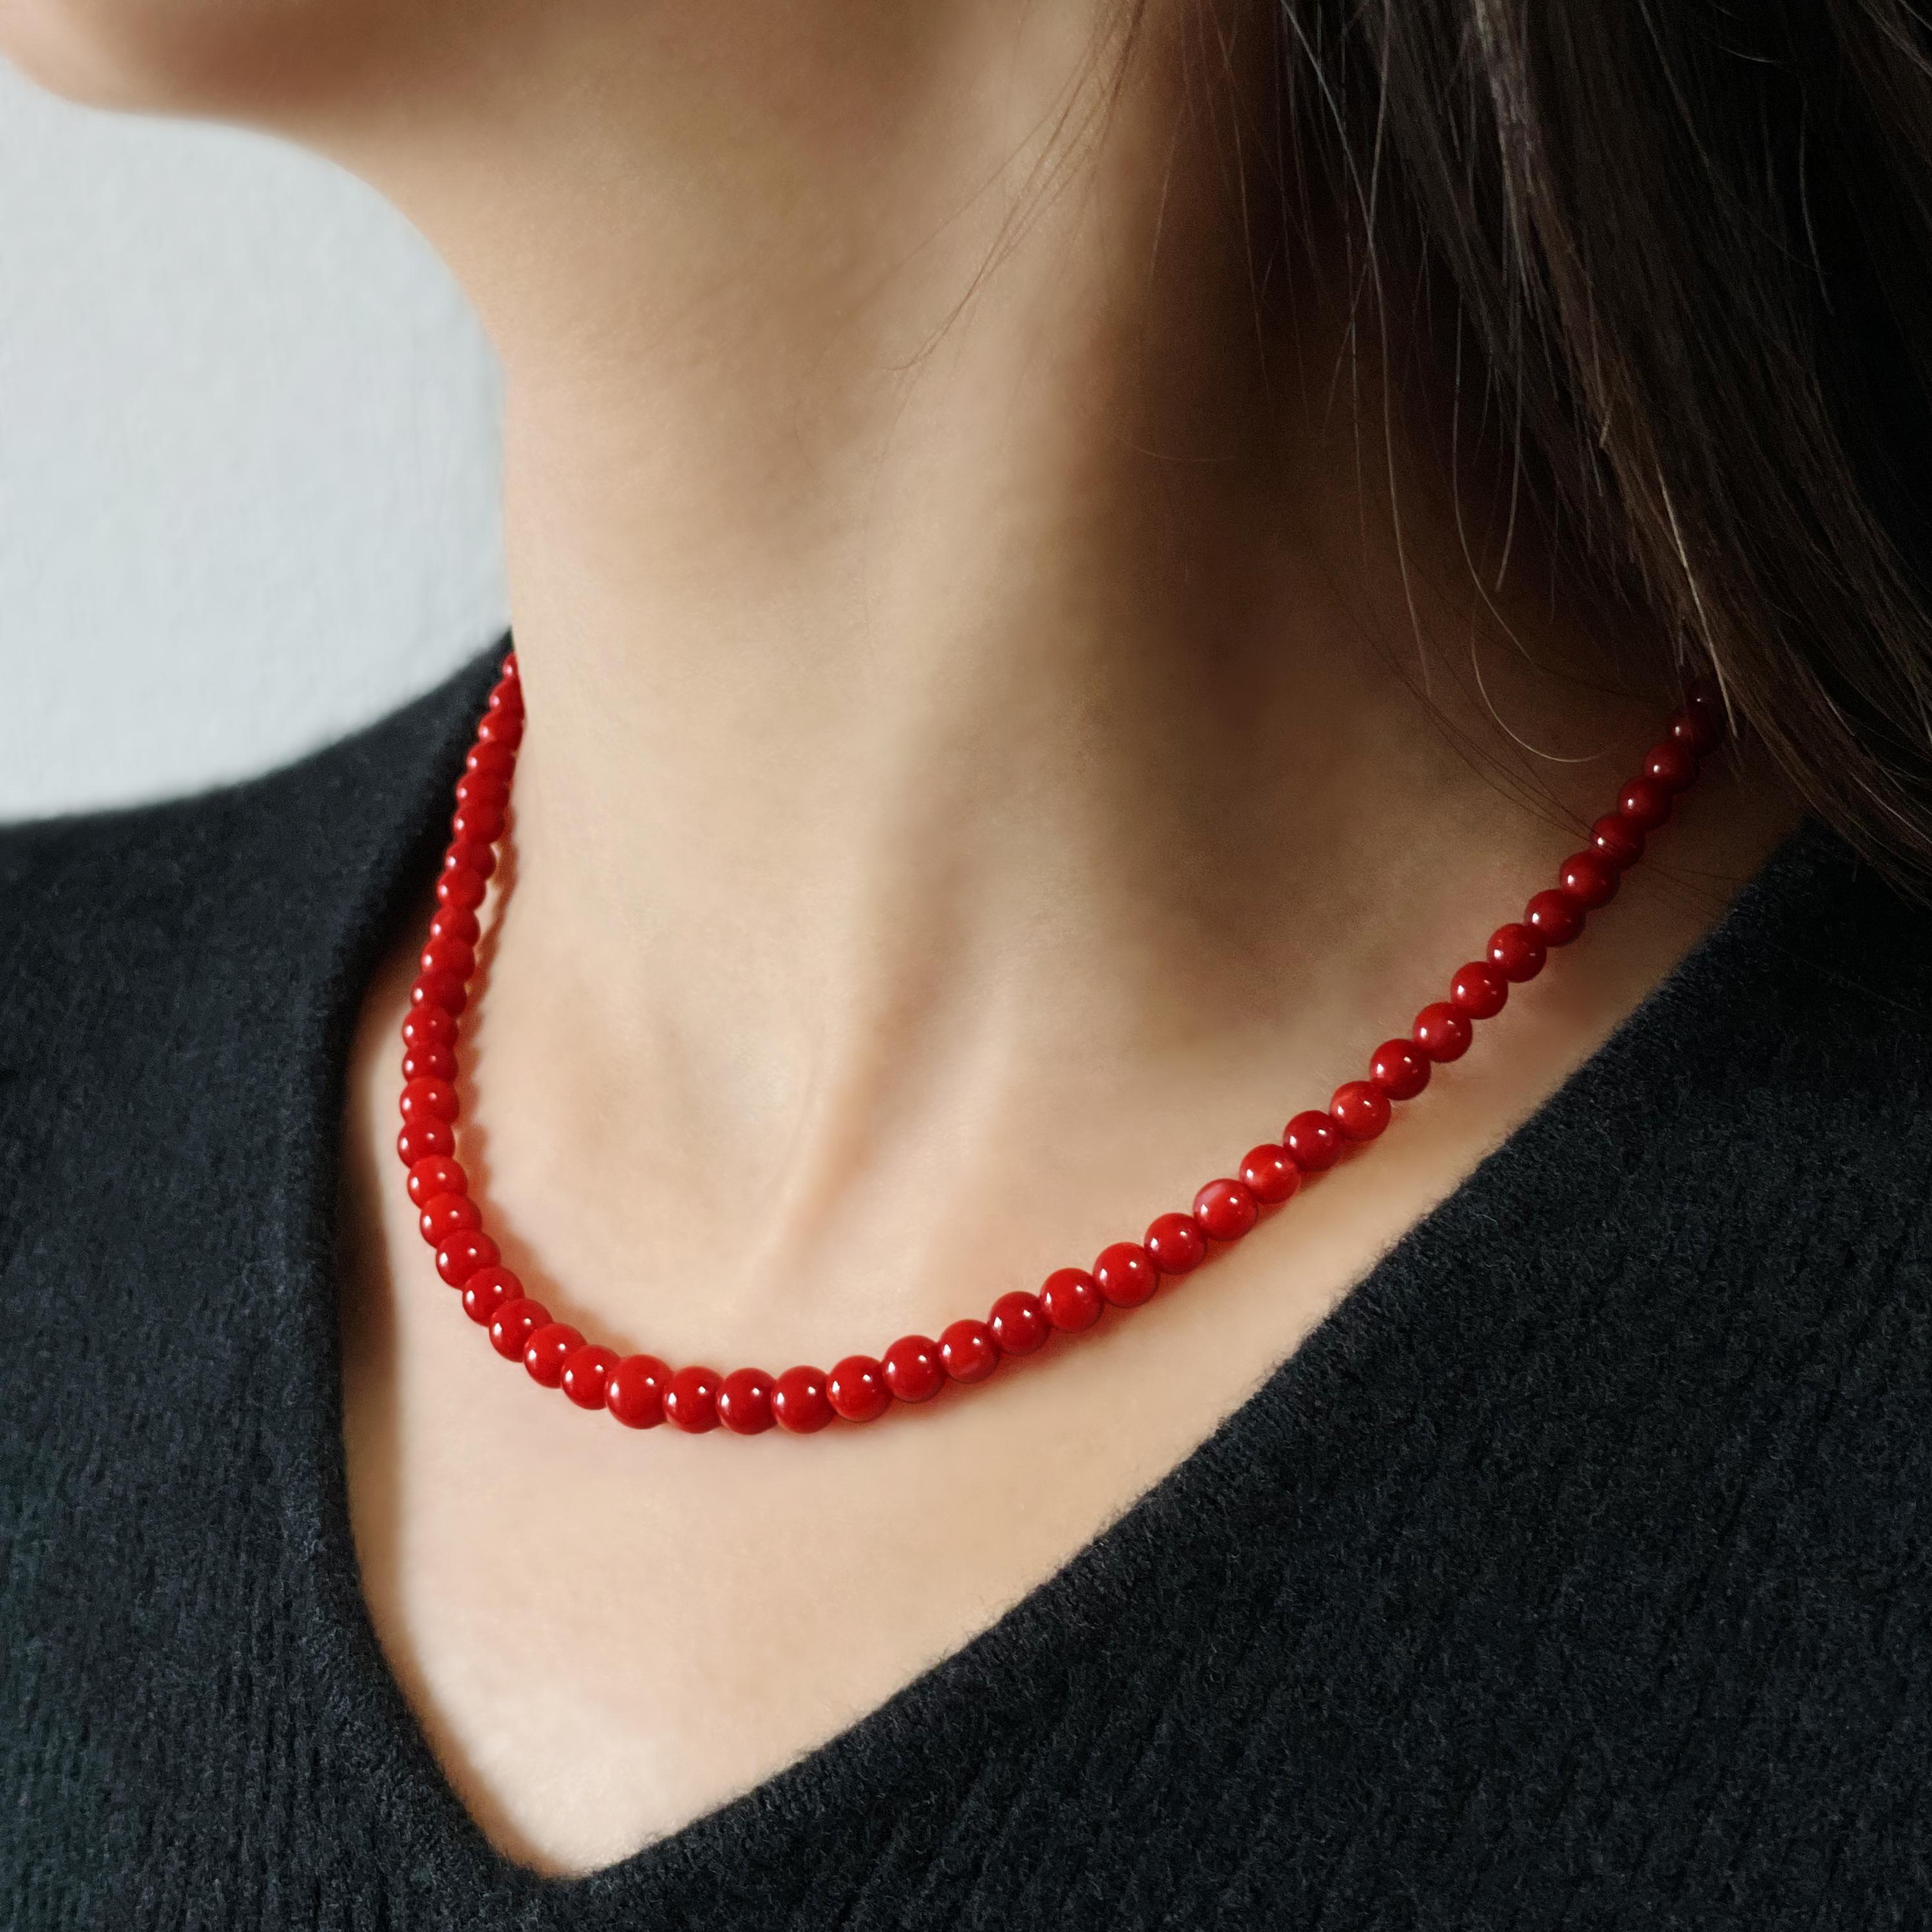 14 Karat White Gold Japanese Red Coral Graduated Beads Necklace For Sale 2